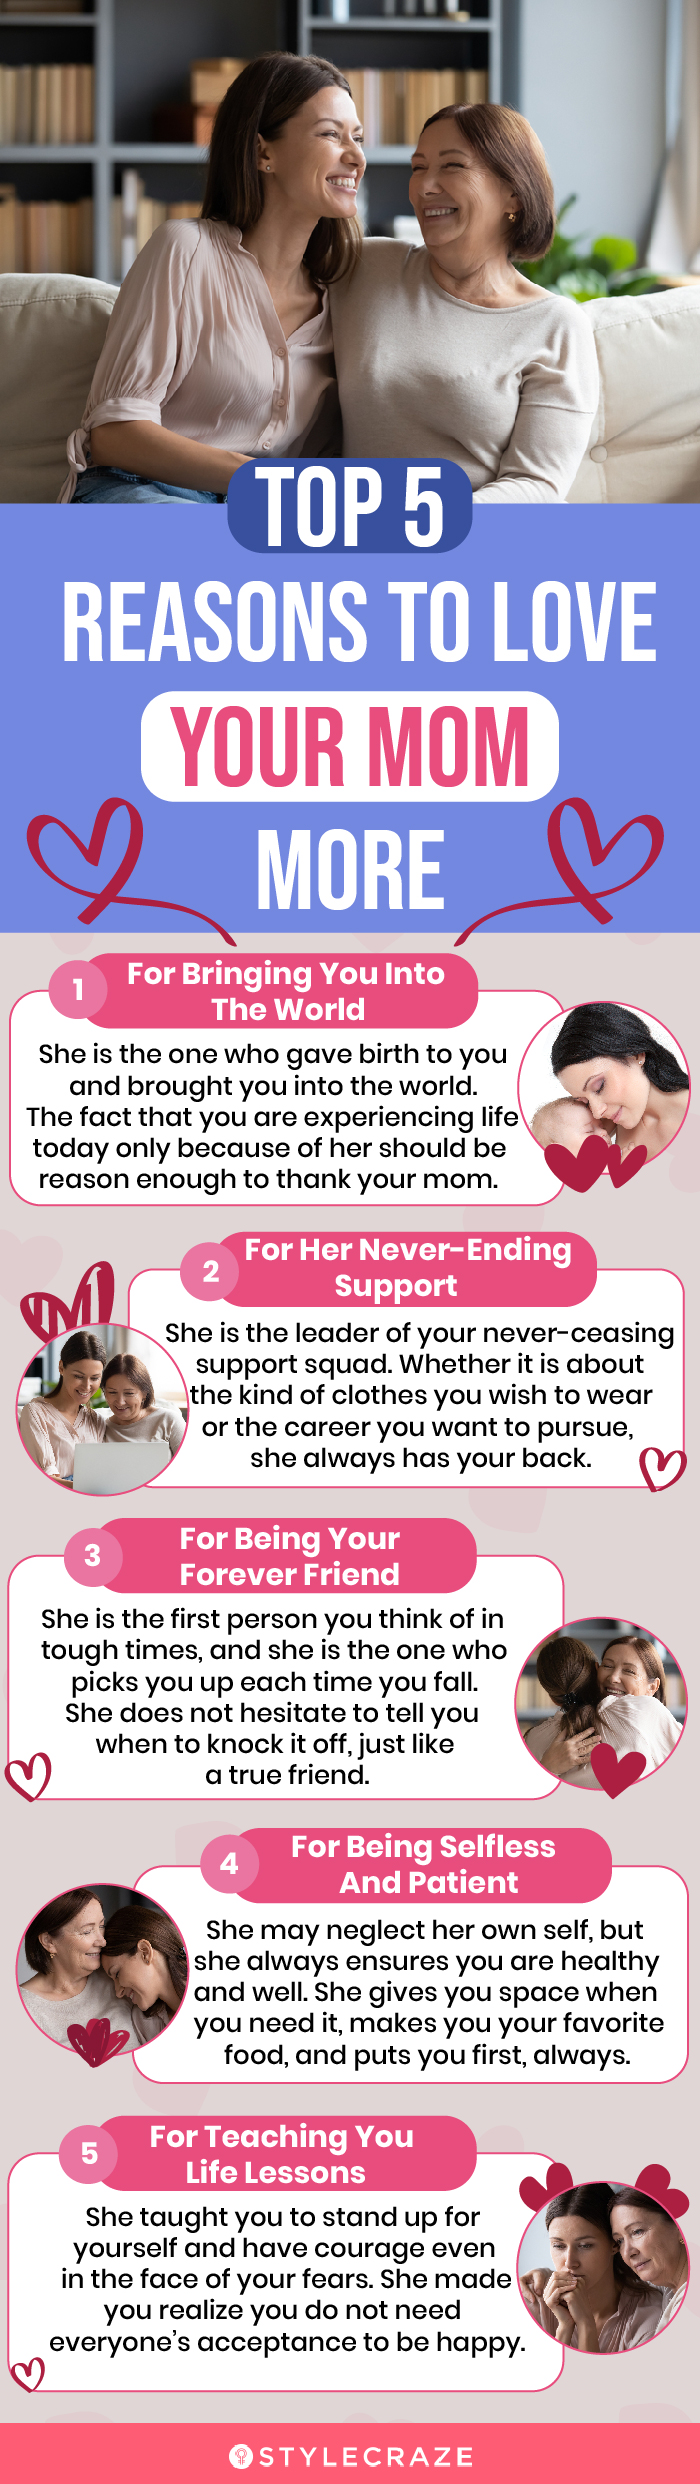 top 5 reasons to love your mom more (infographic)